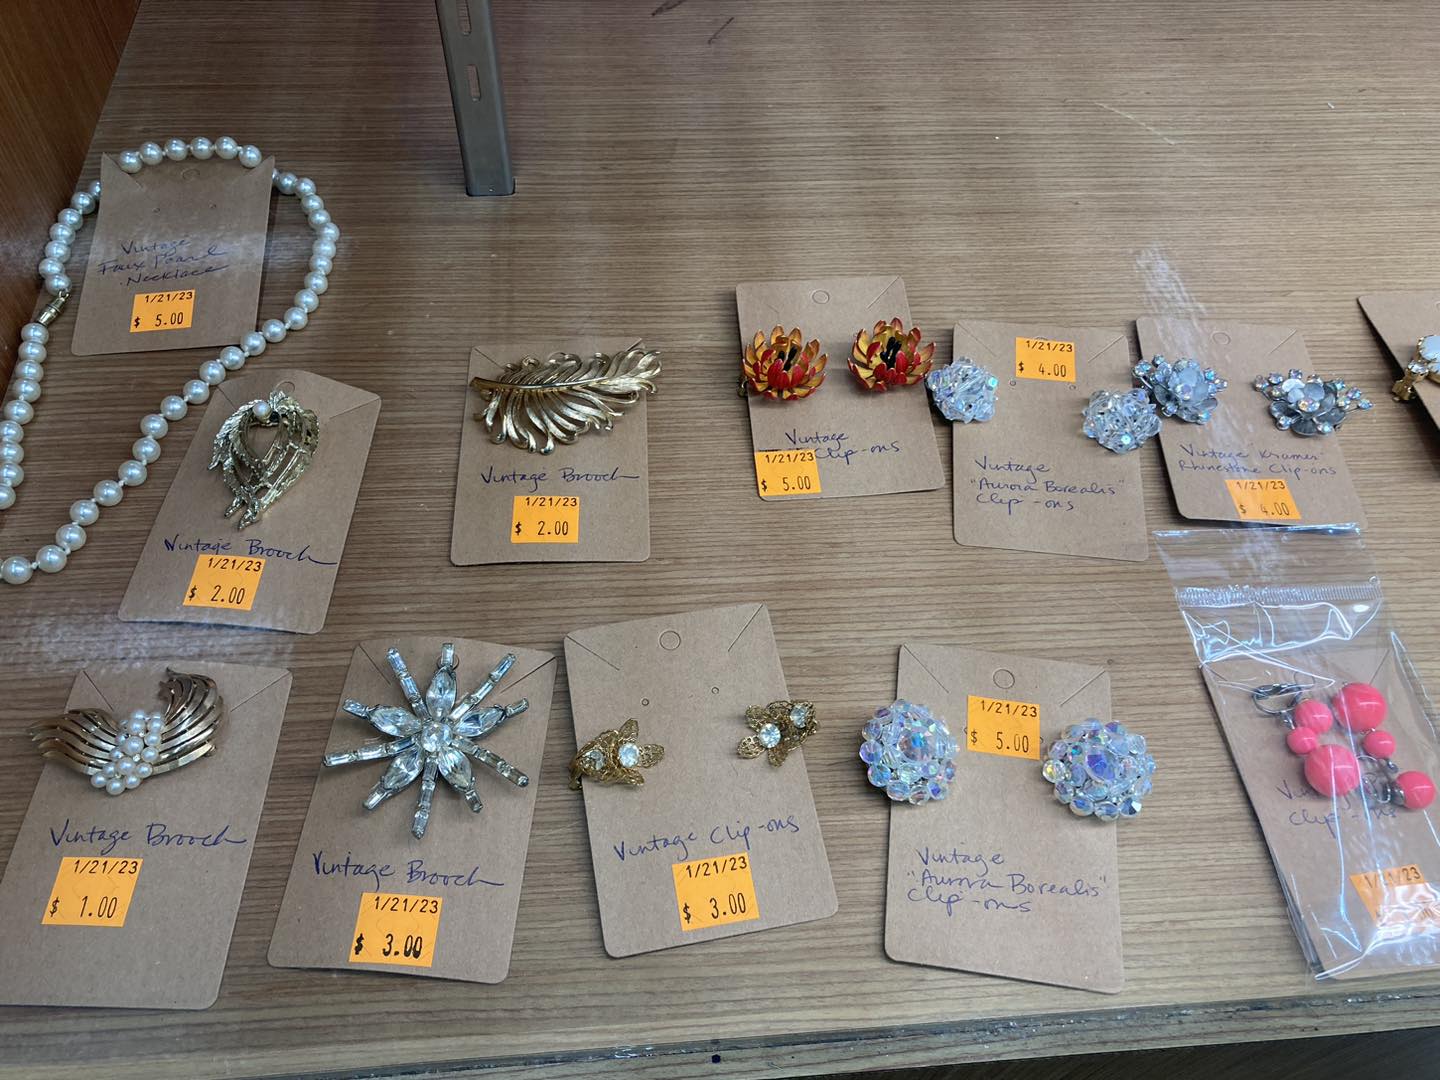 A collection of vintage looking brooches and earrings attached to brown cardboard with orange price stickers.